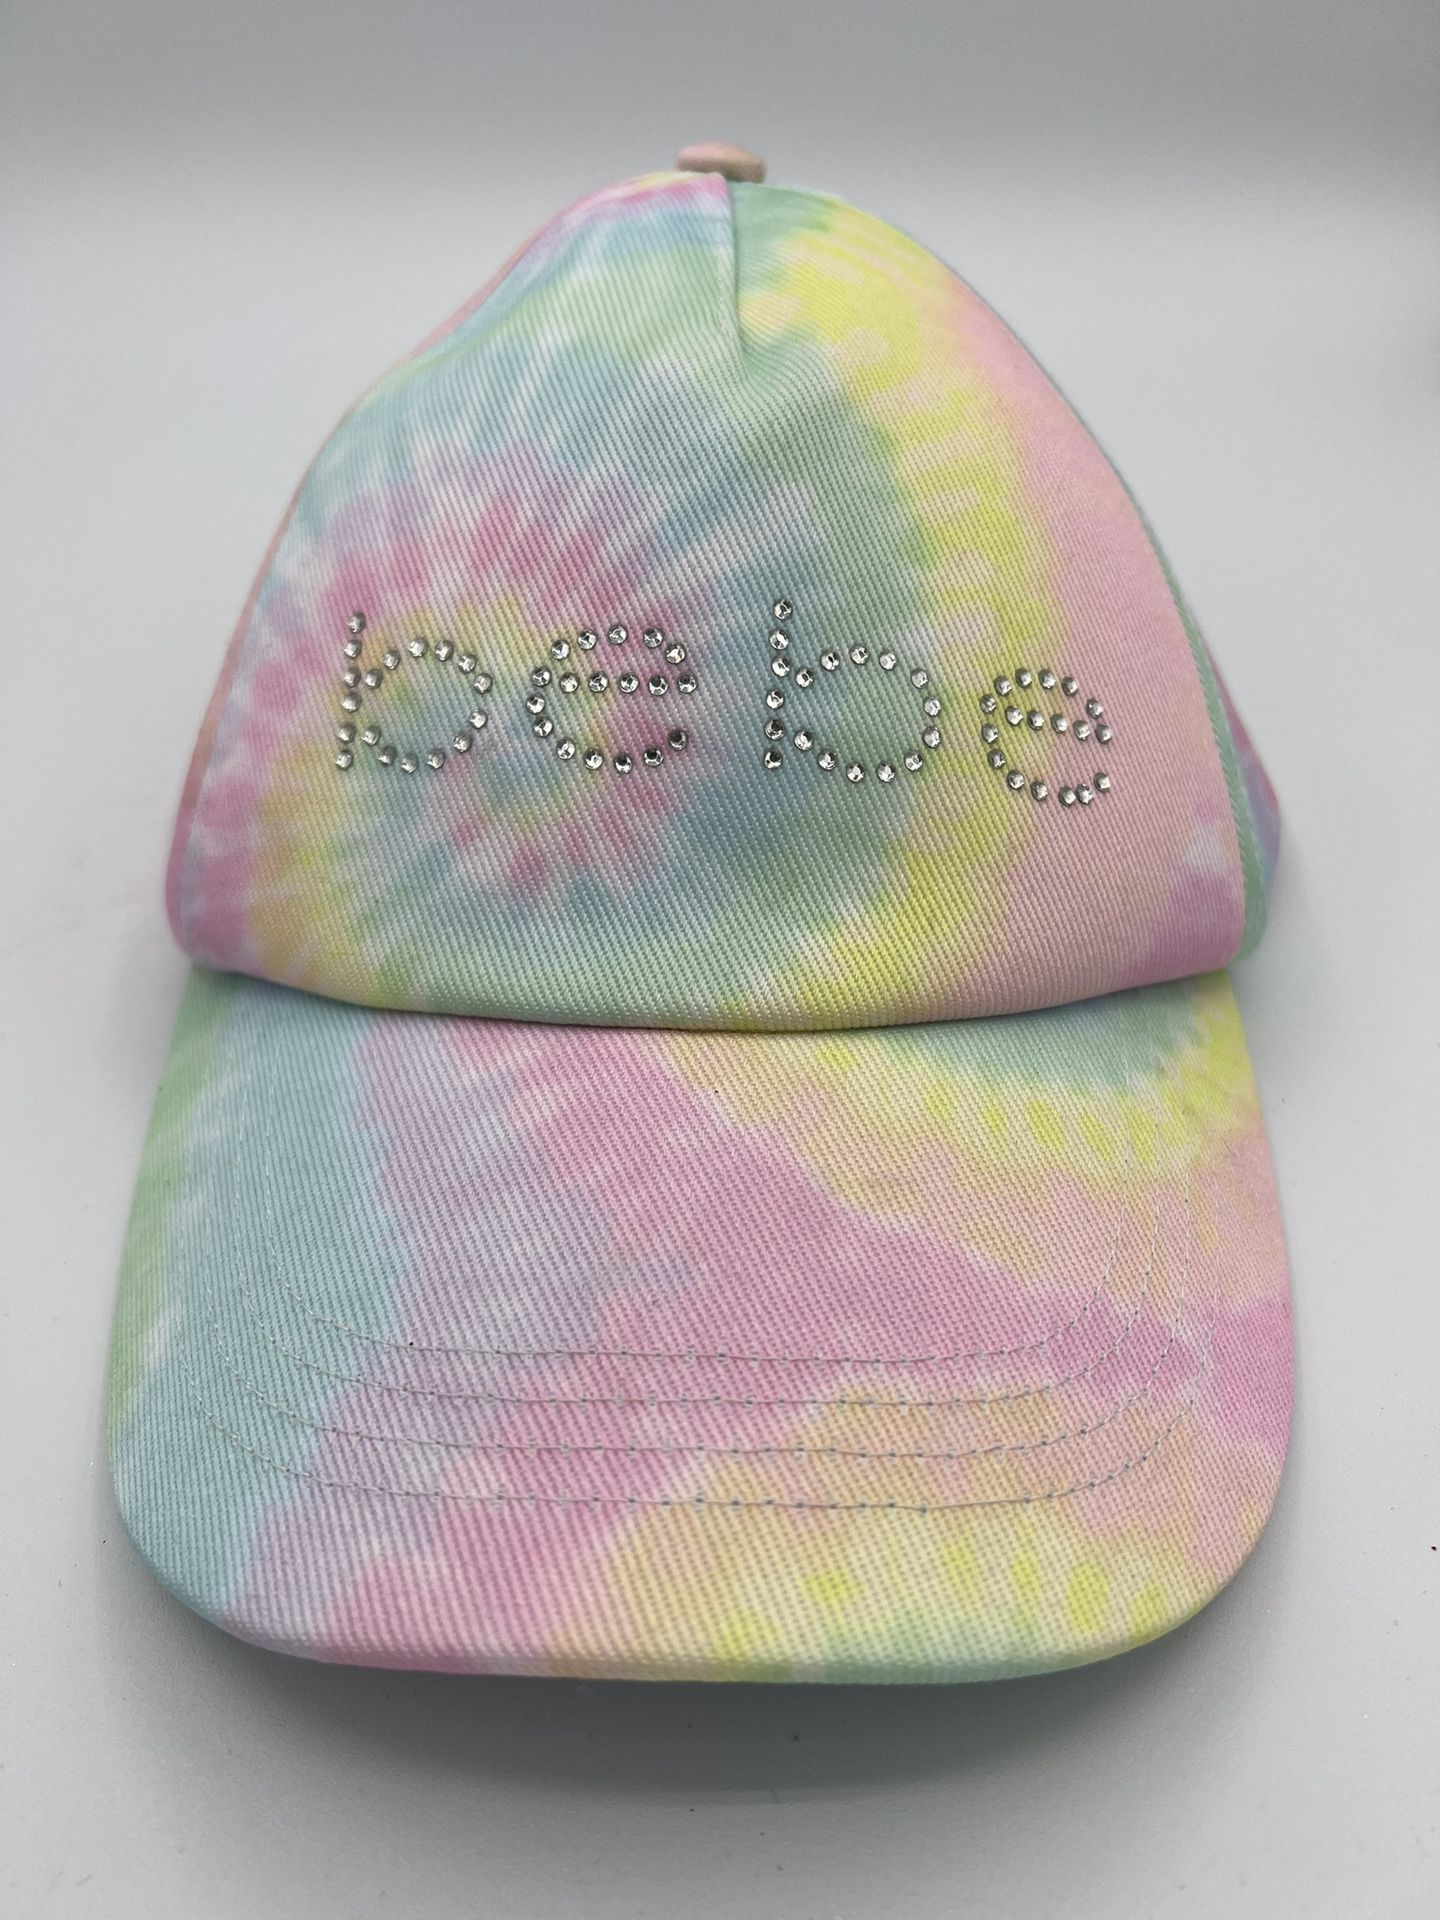 Bebe girls hat tye dye pink.  Teenagers will fit excellent condition  Brand BEBE in rhinestones  Comes from a pet and smoke free household  B29 